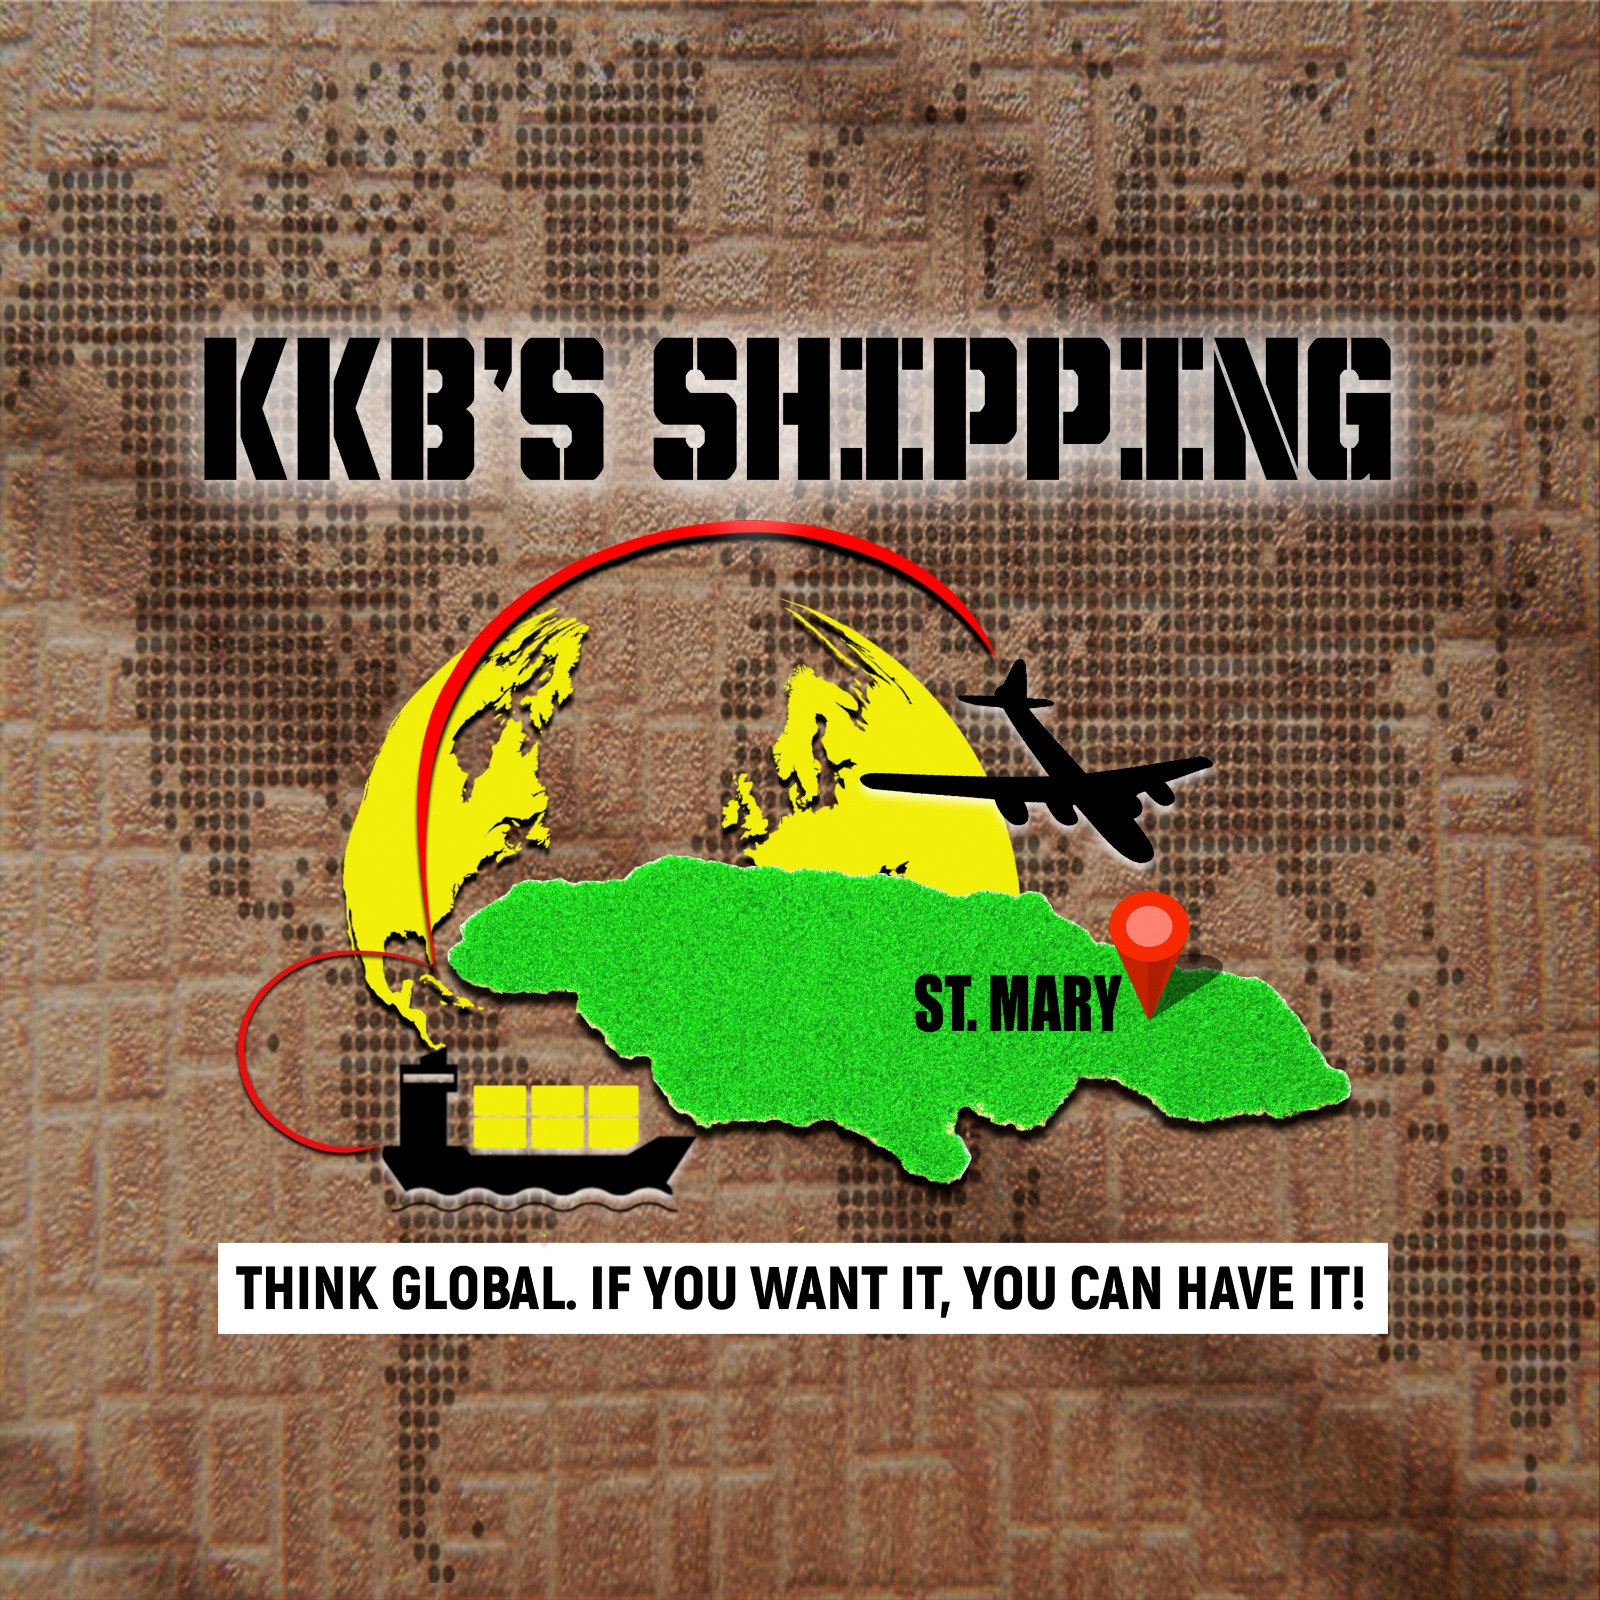 kkb's shipping - 